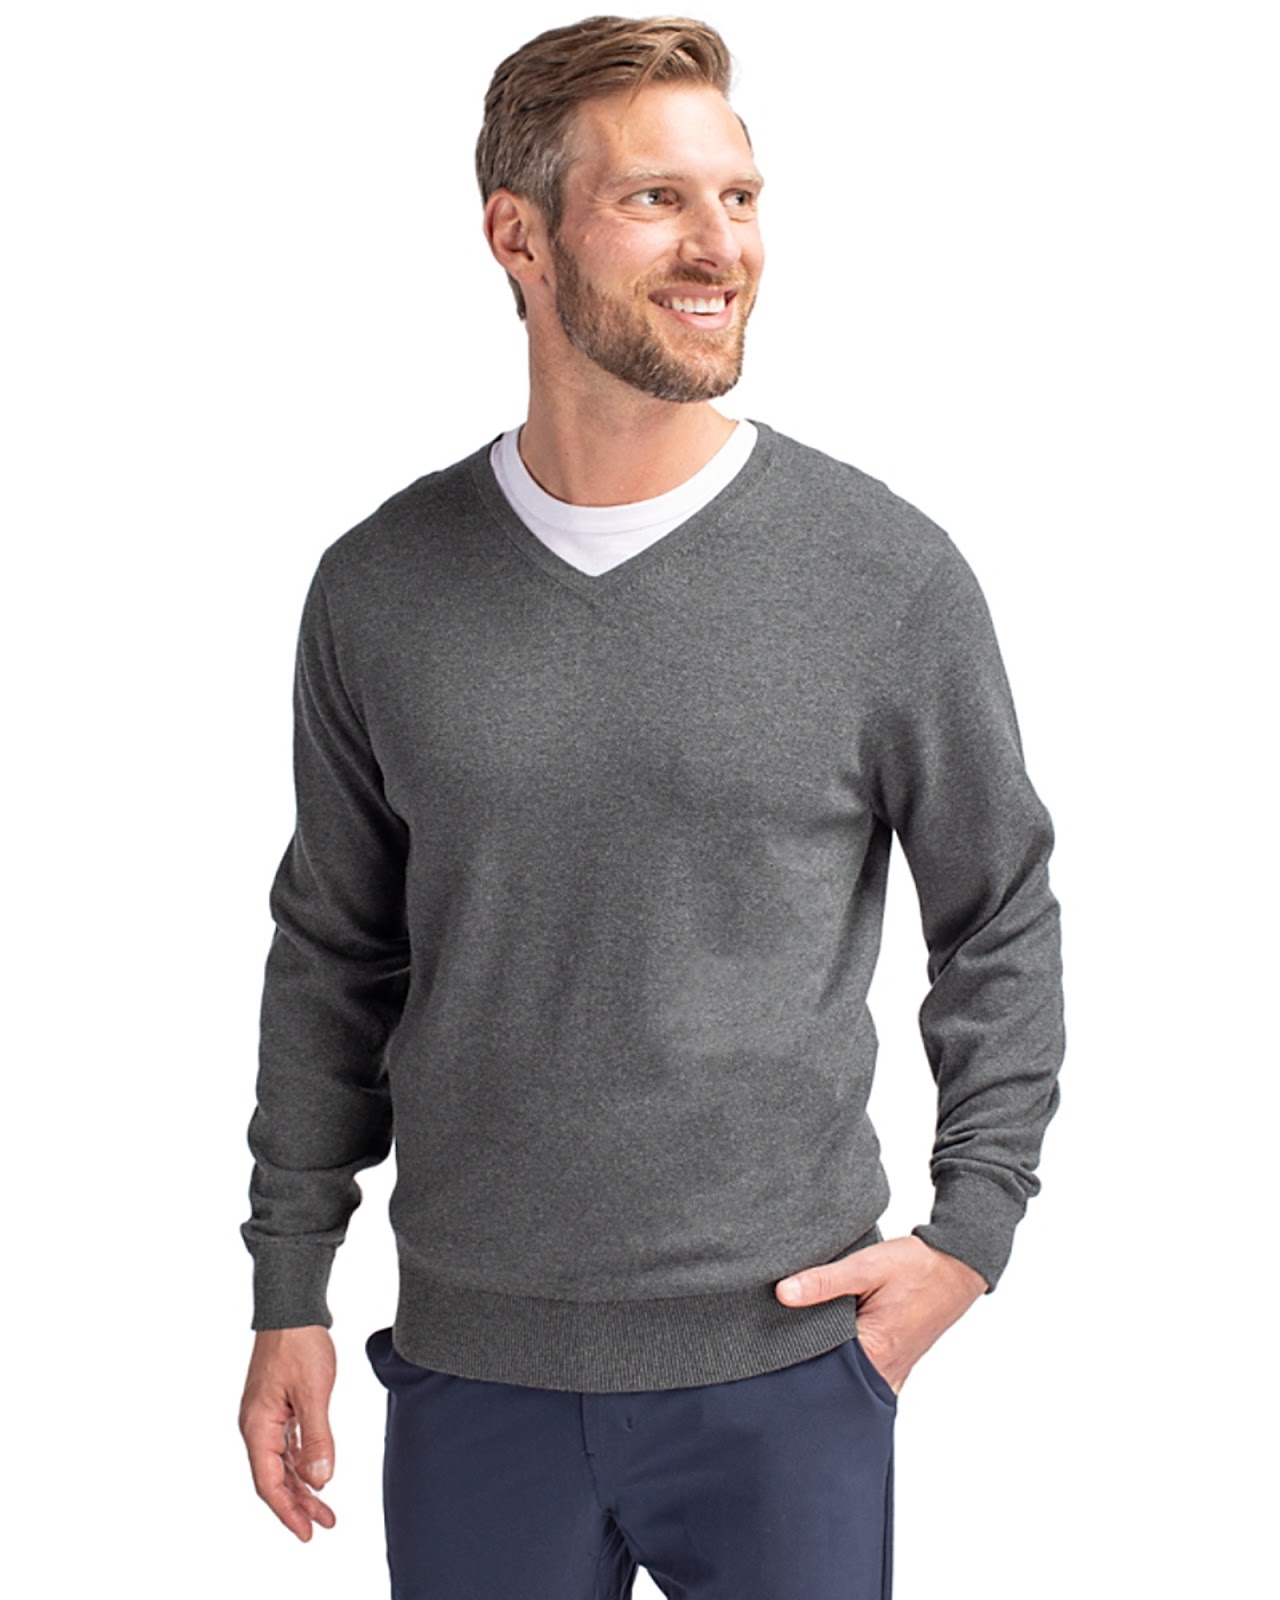 Cutter & Buck Lakemont Tri-Blend Men’s V-Neck Pullover Sweater in Charcoal Heather